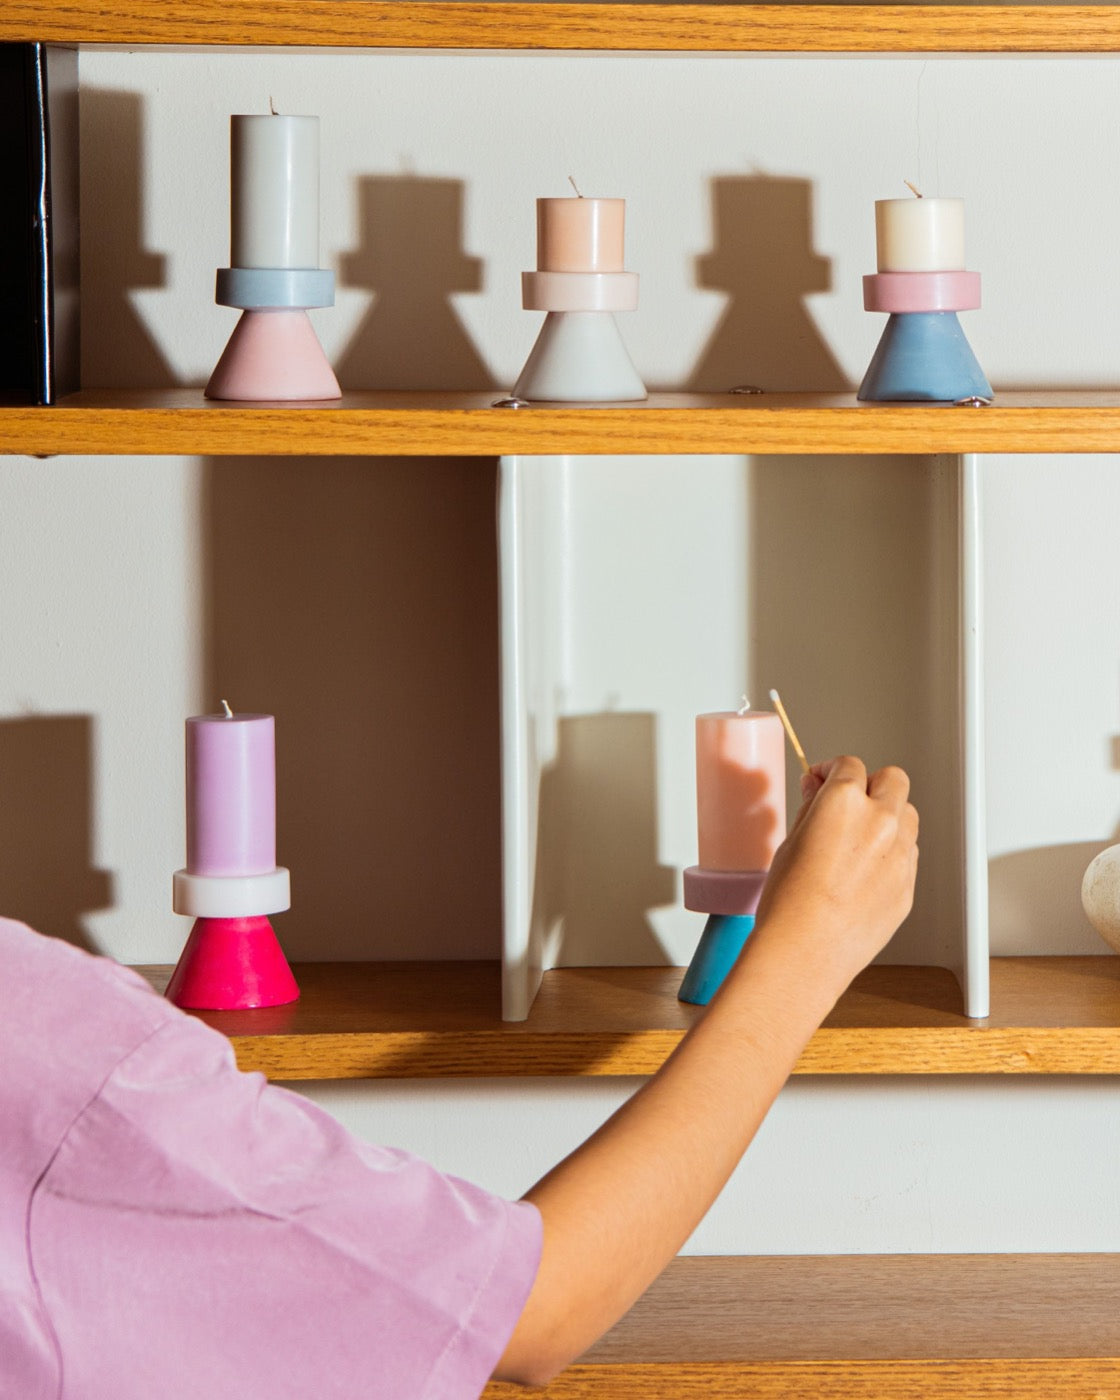 Stack Candles by Yod and Co in pink, cream, grey and blue